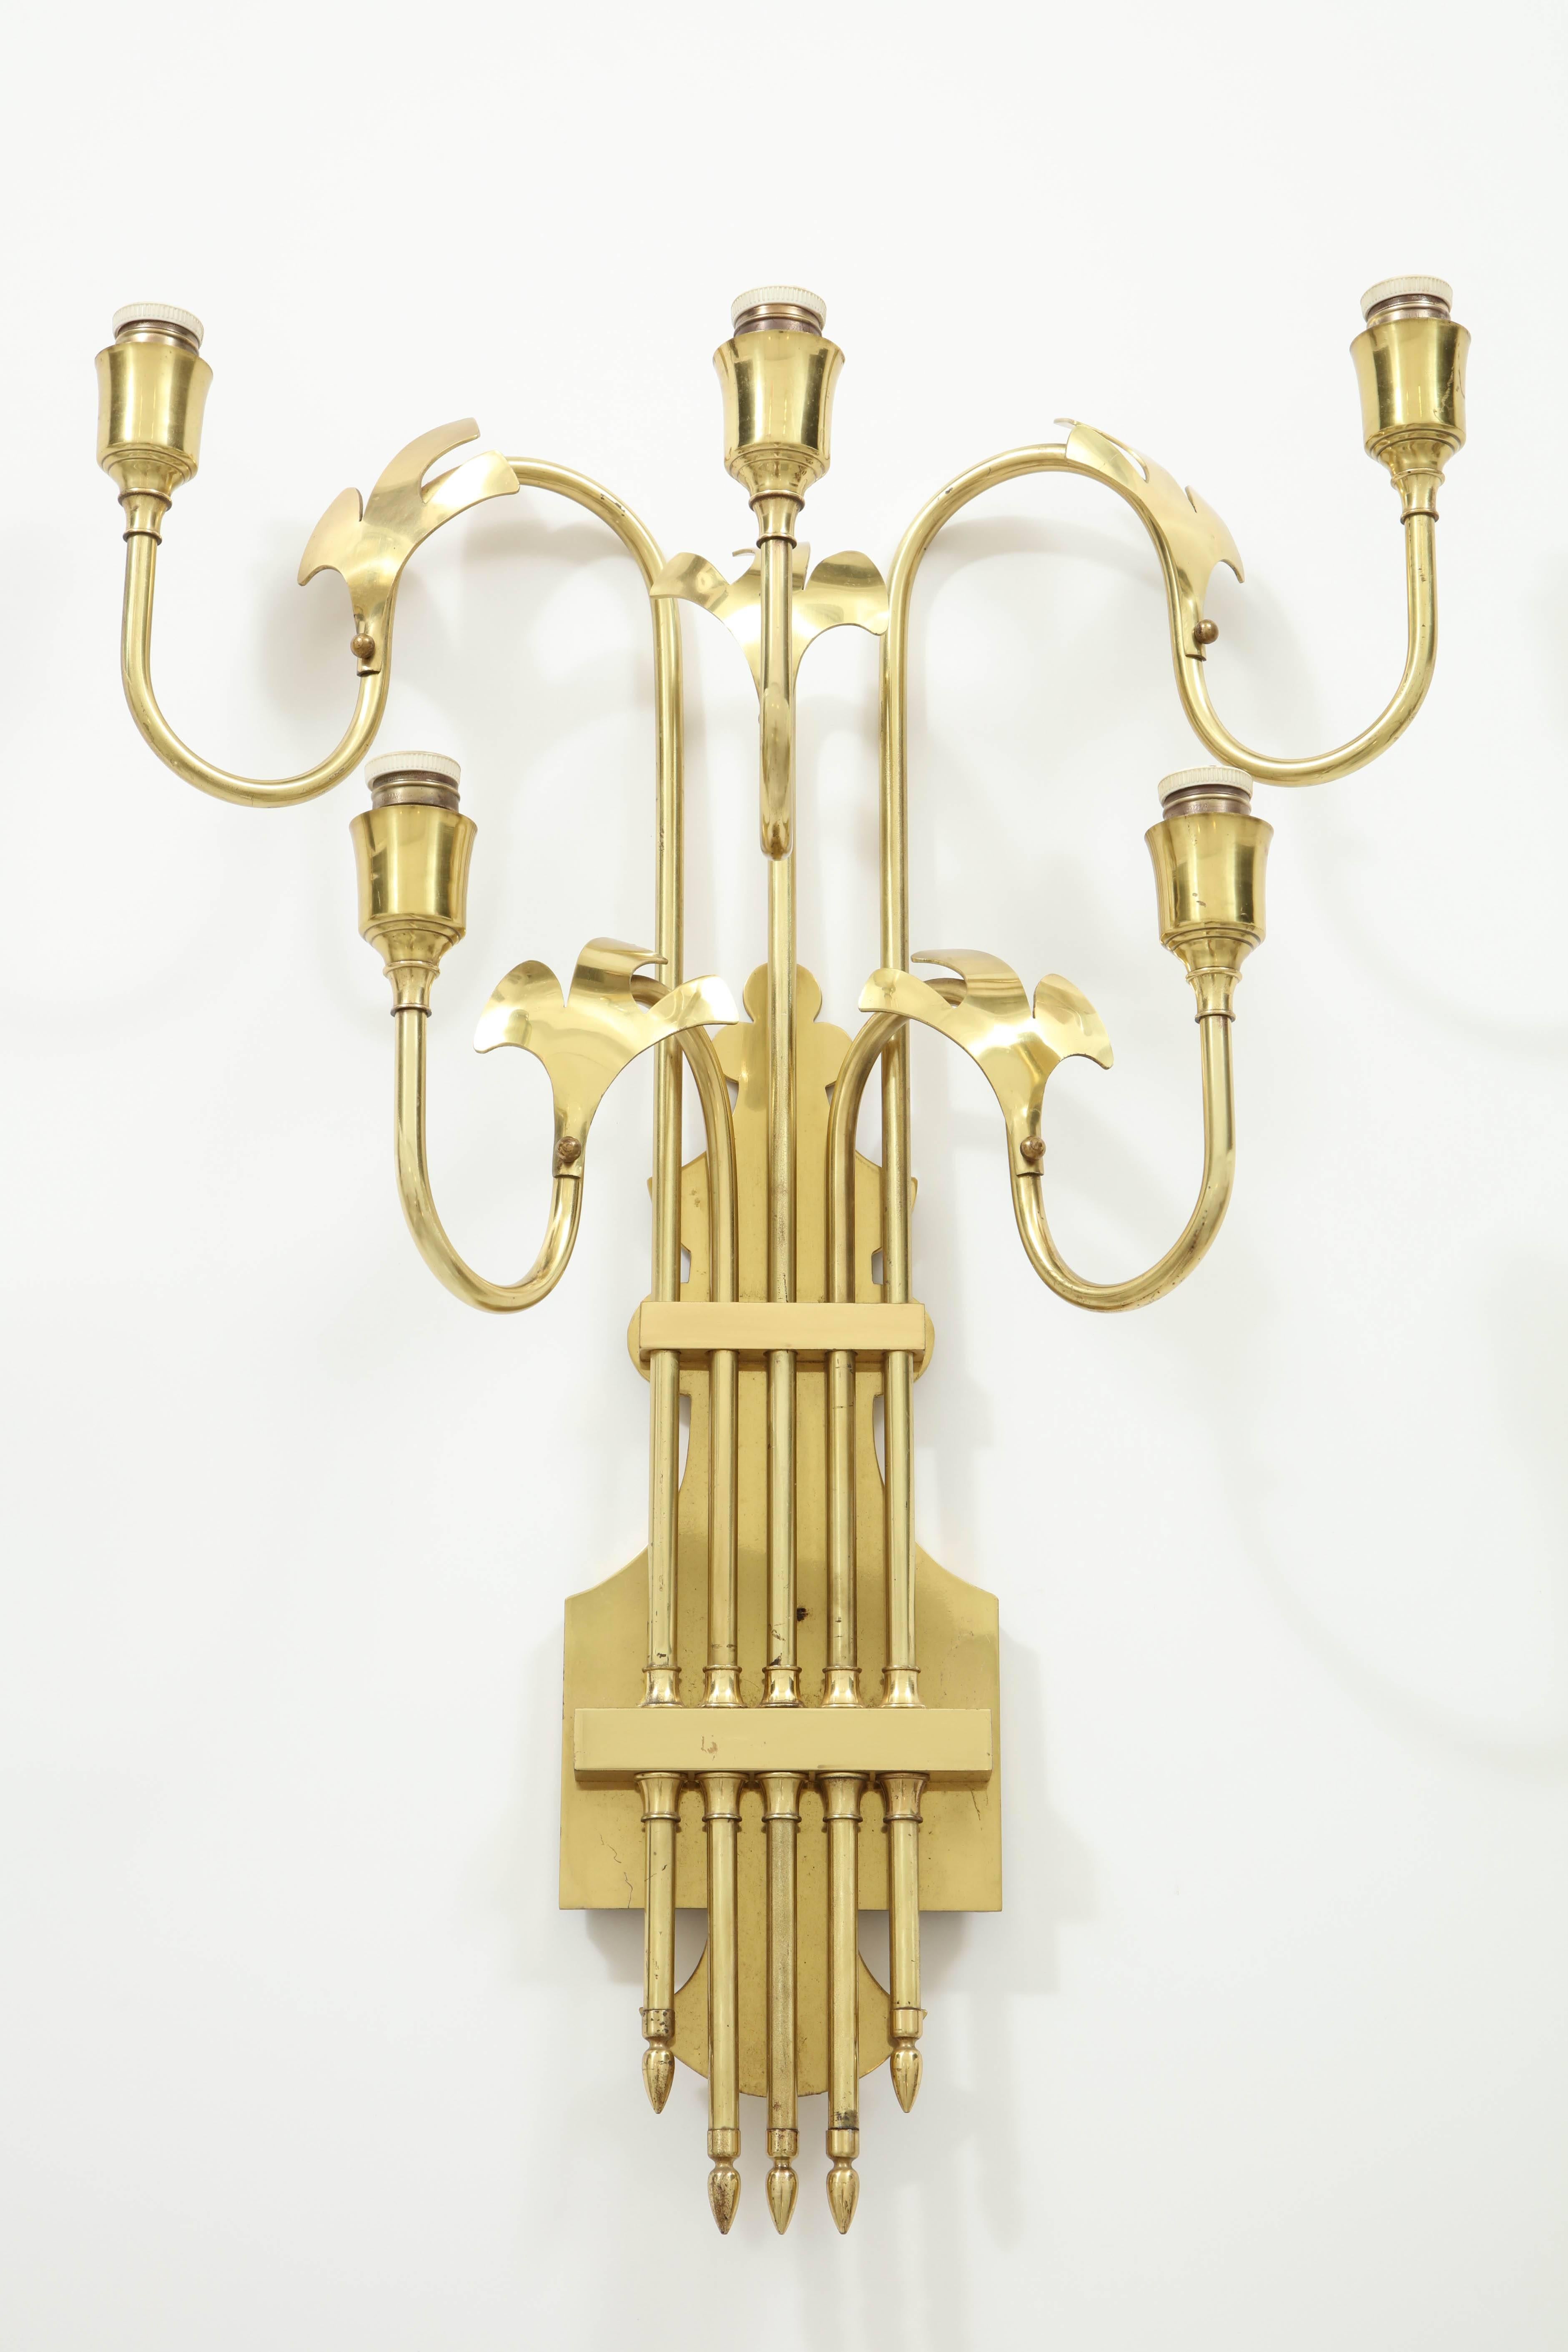 Large-scale brass Swedish sconces, five-light each. Shades can be made to order.